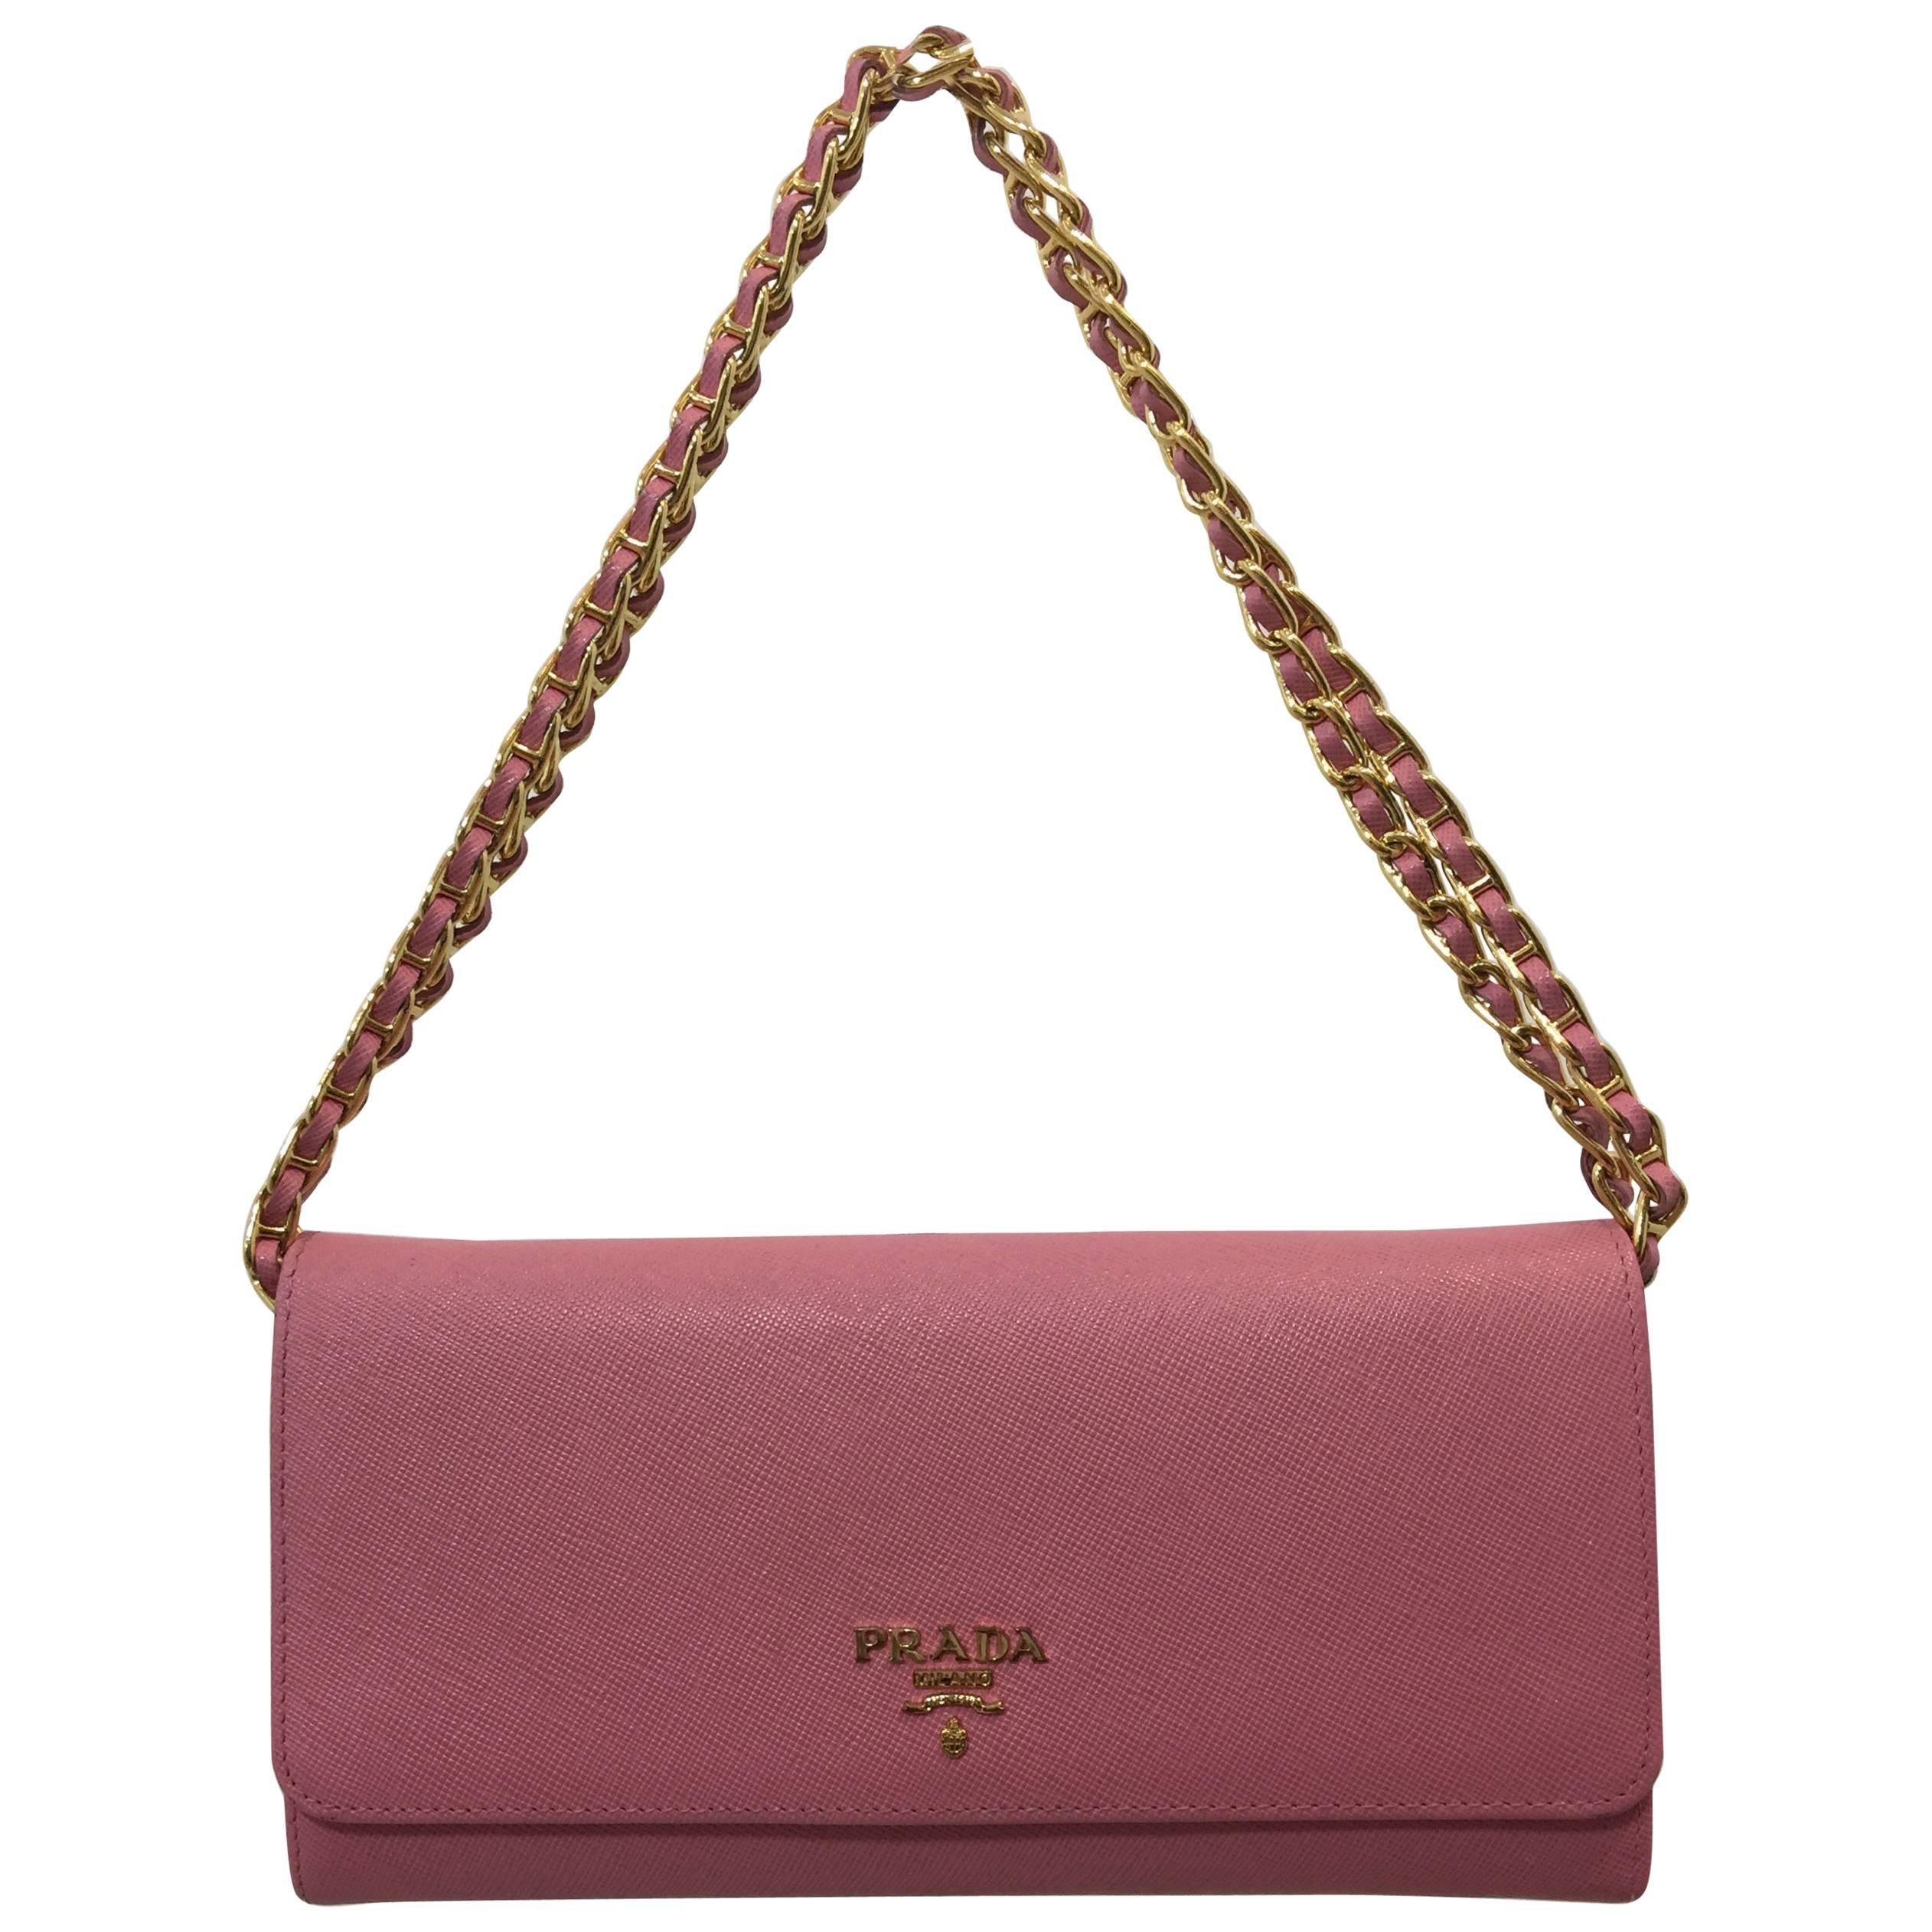 Prada Pink Saffiano Leather Wallet on a Chain 